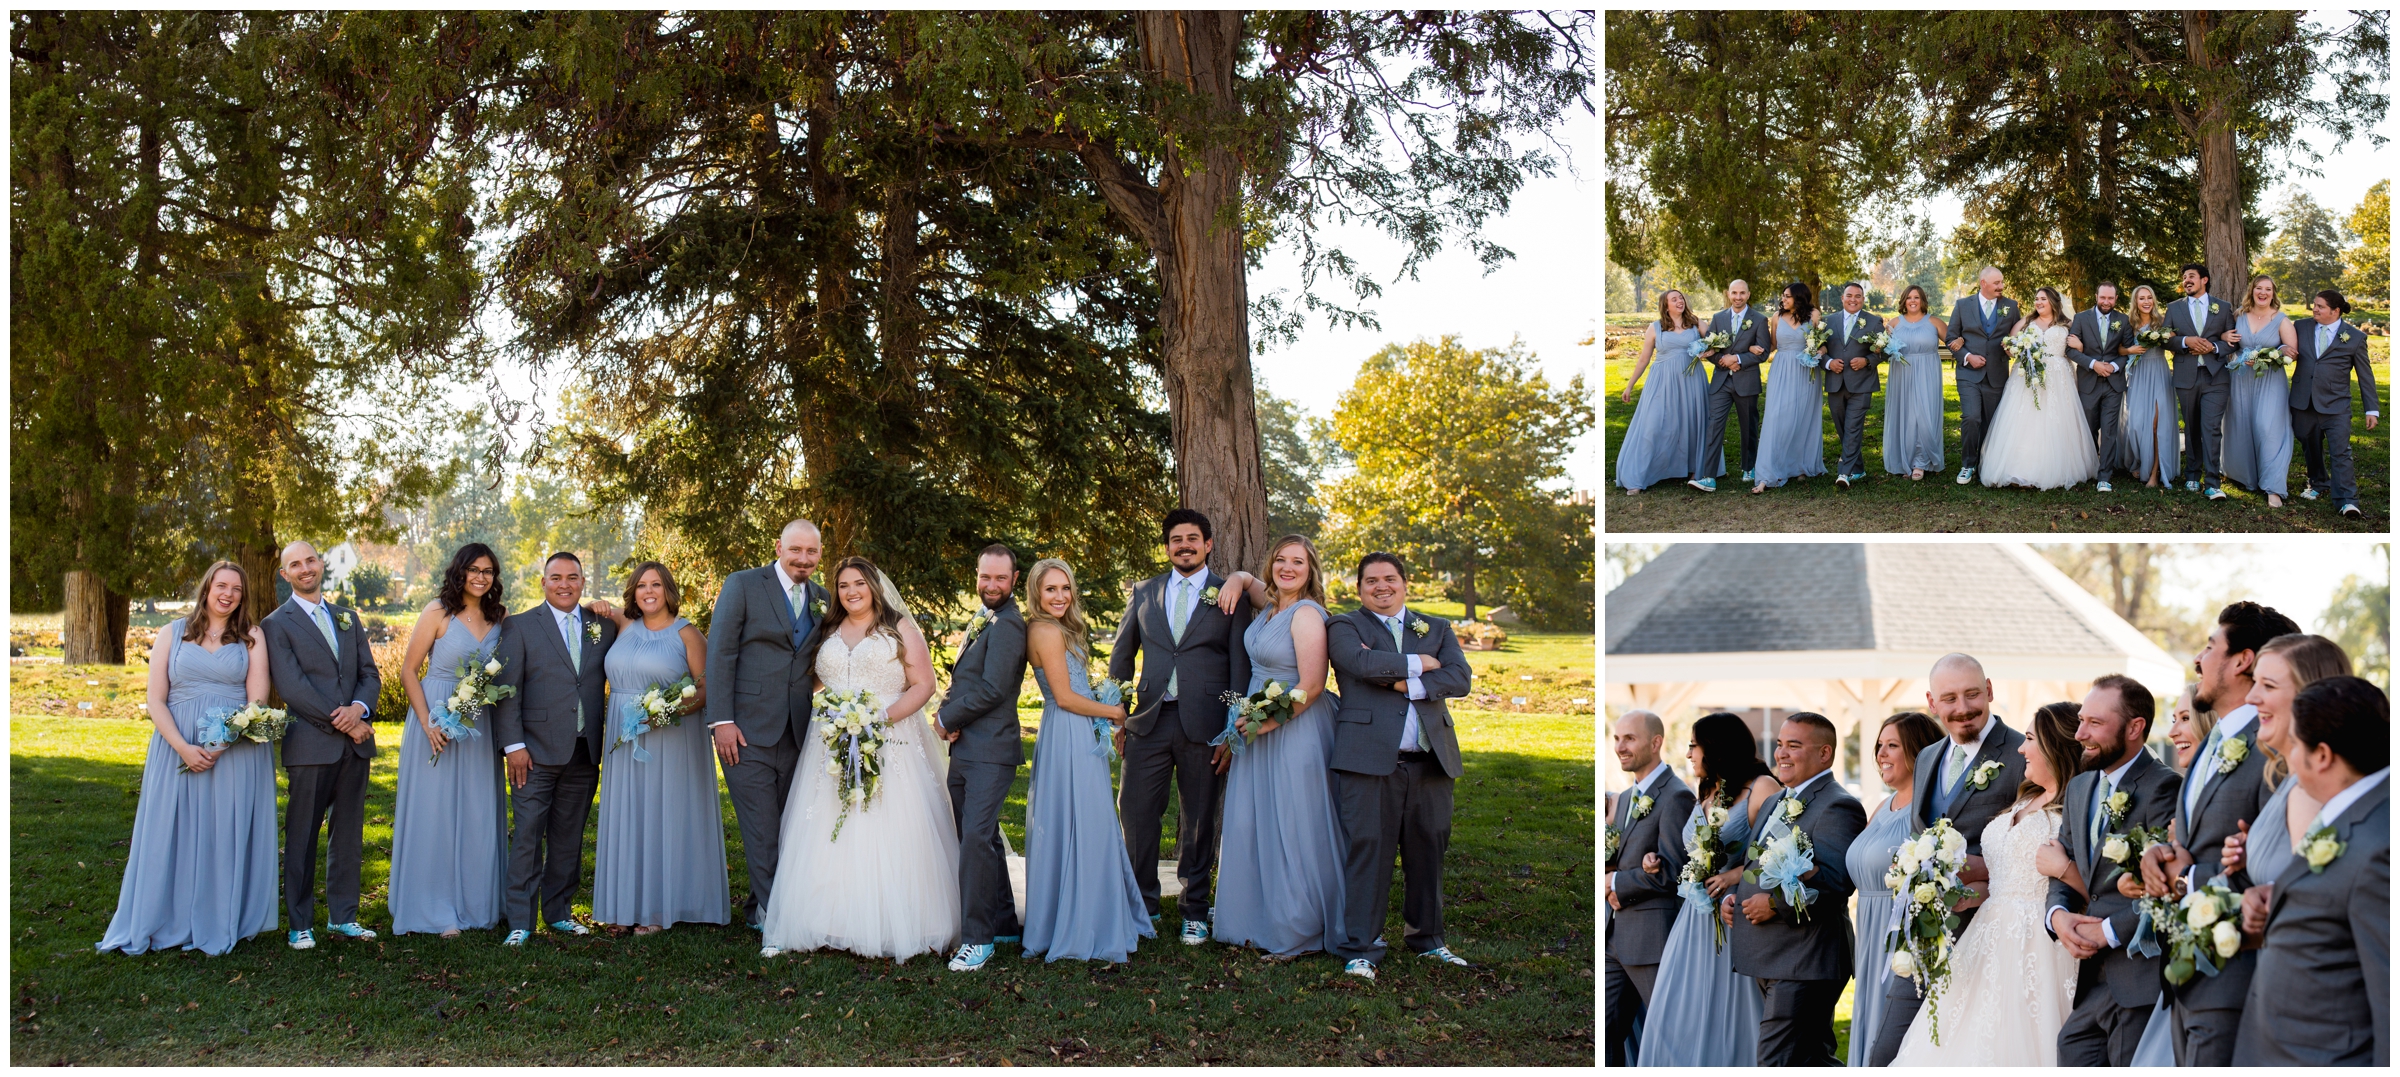 bridal party in gray and light blue at Fort Collins Colorado wedding 